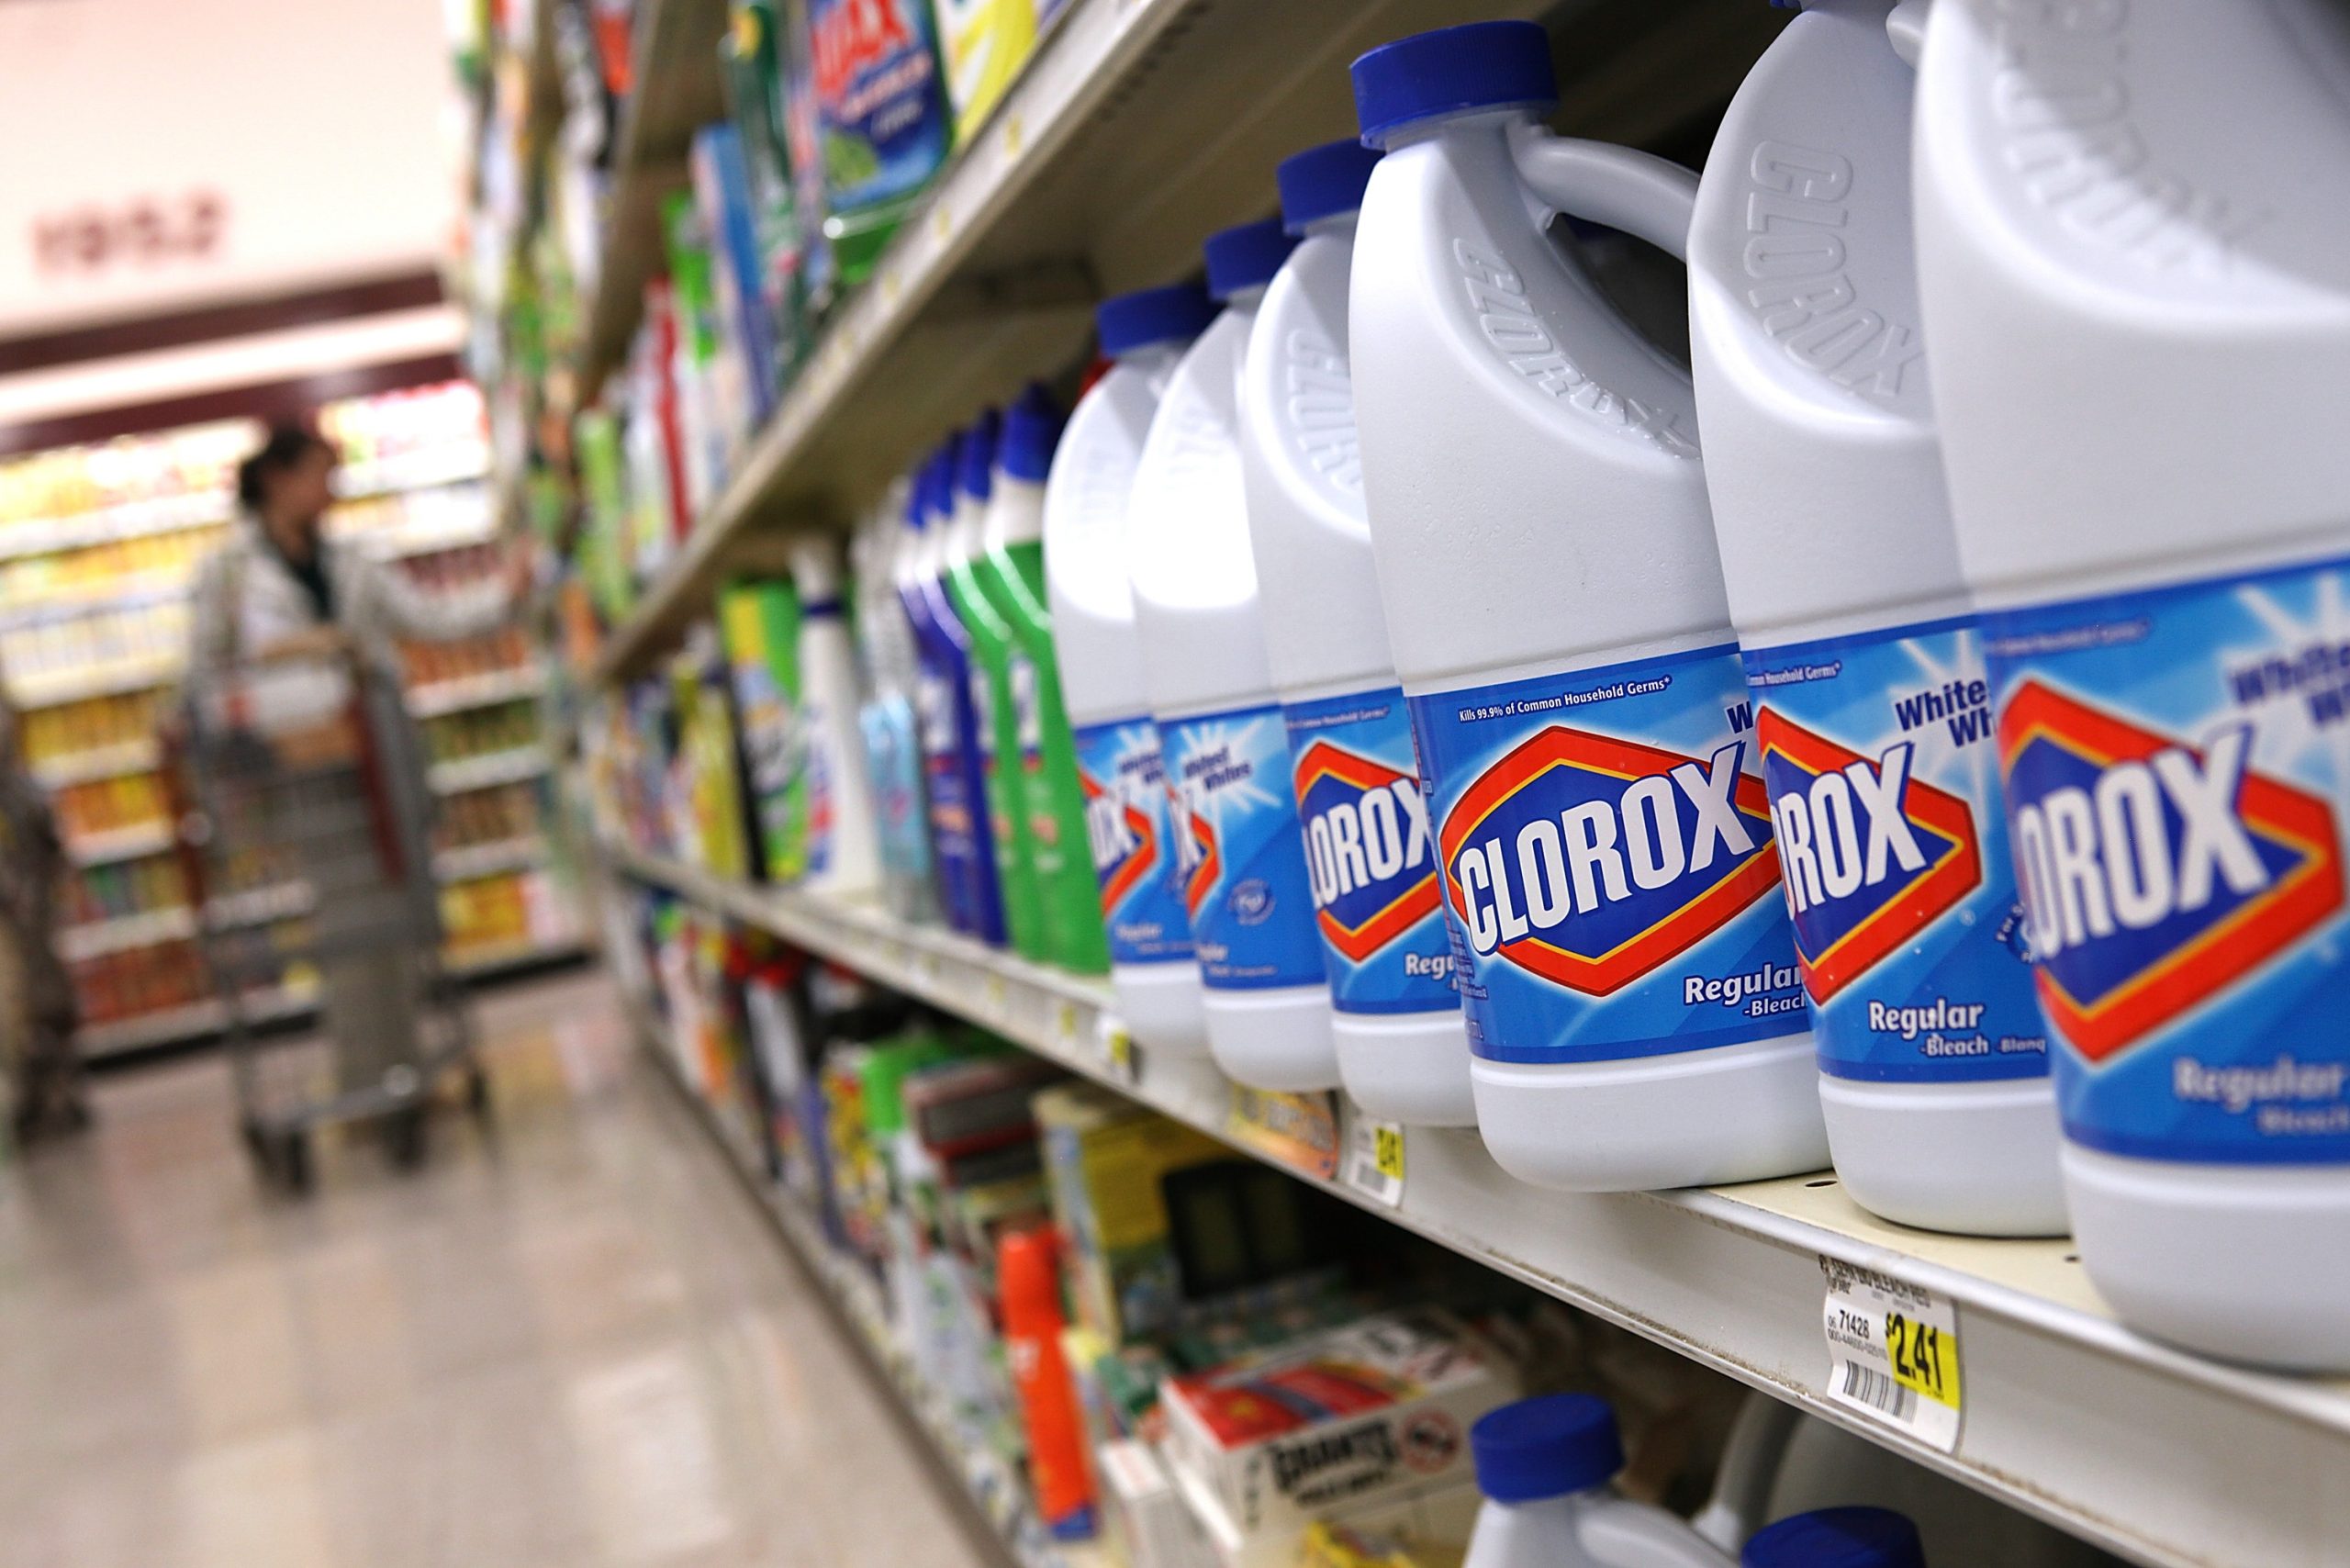 Clorox Co Shares Jump  After Investor Ichahn Reports Stake In Company